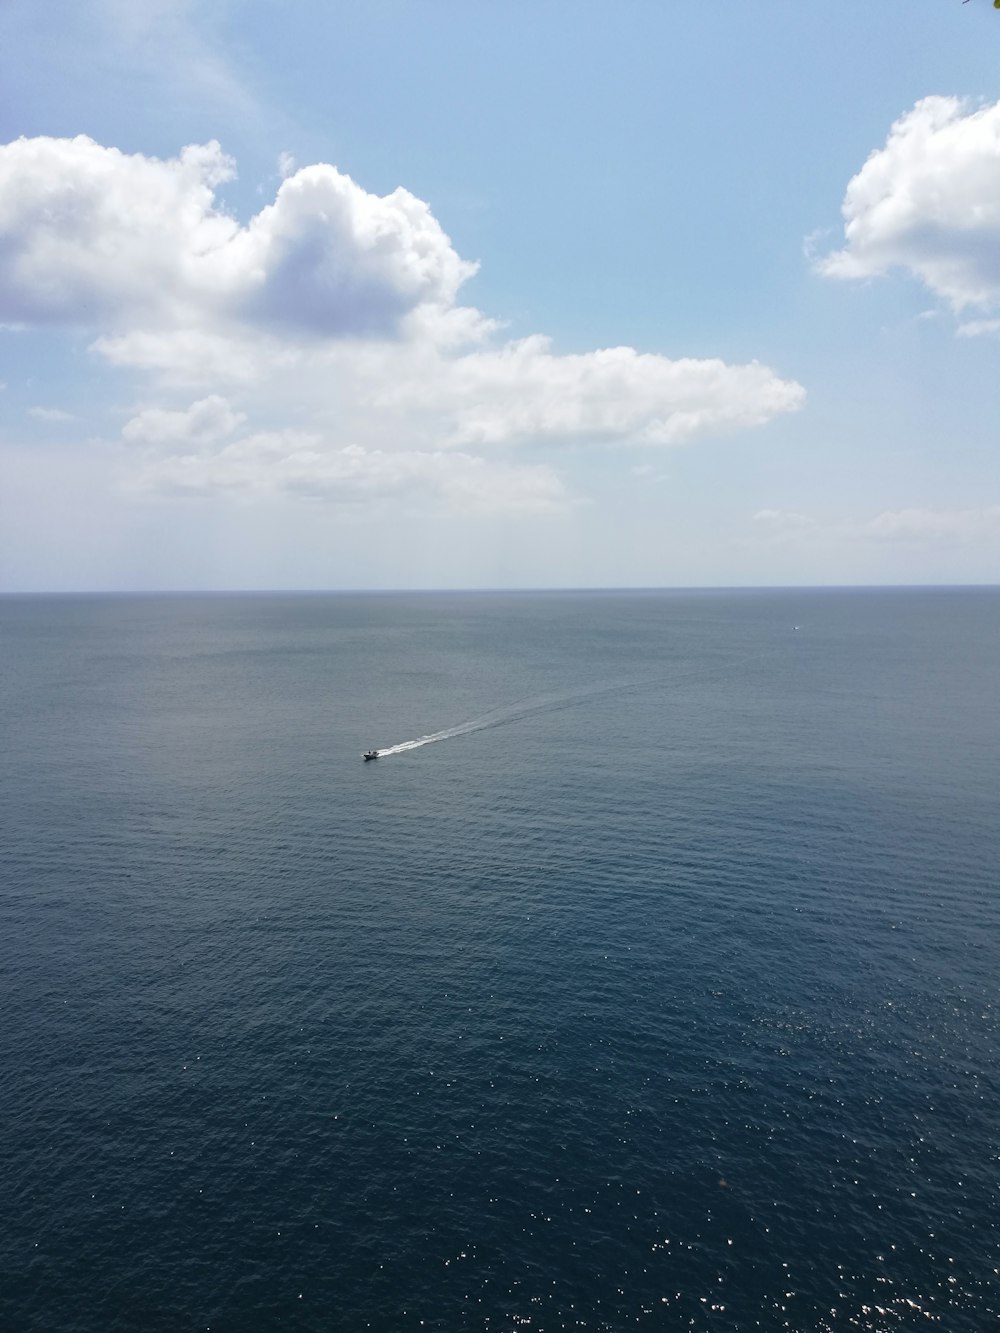 a boat in the middle of the ocean on a sunny day